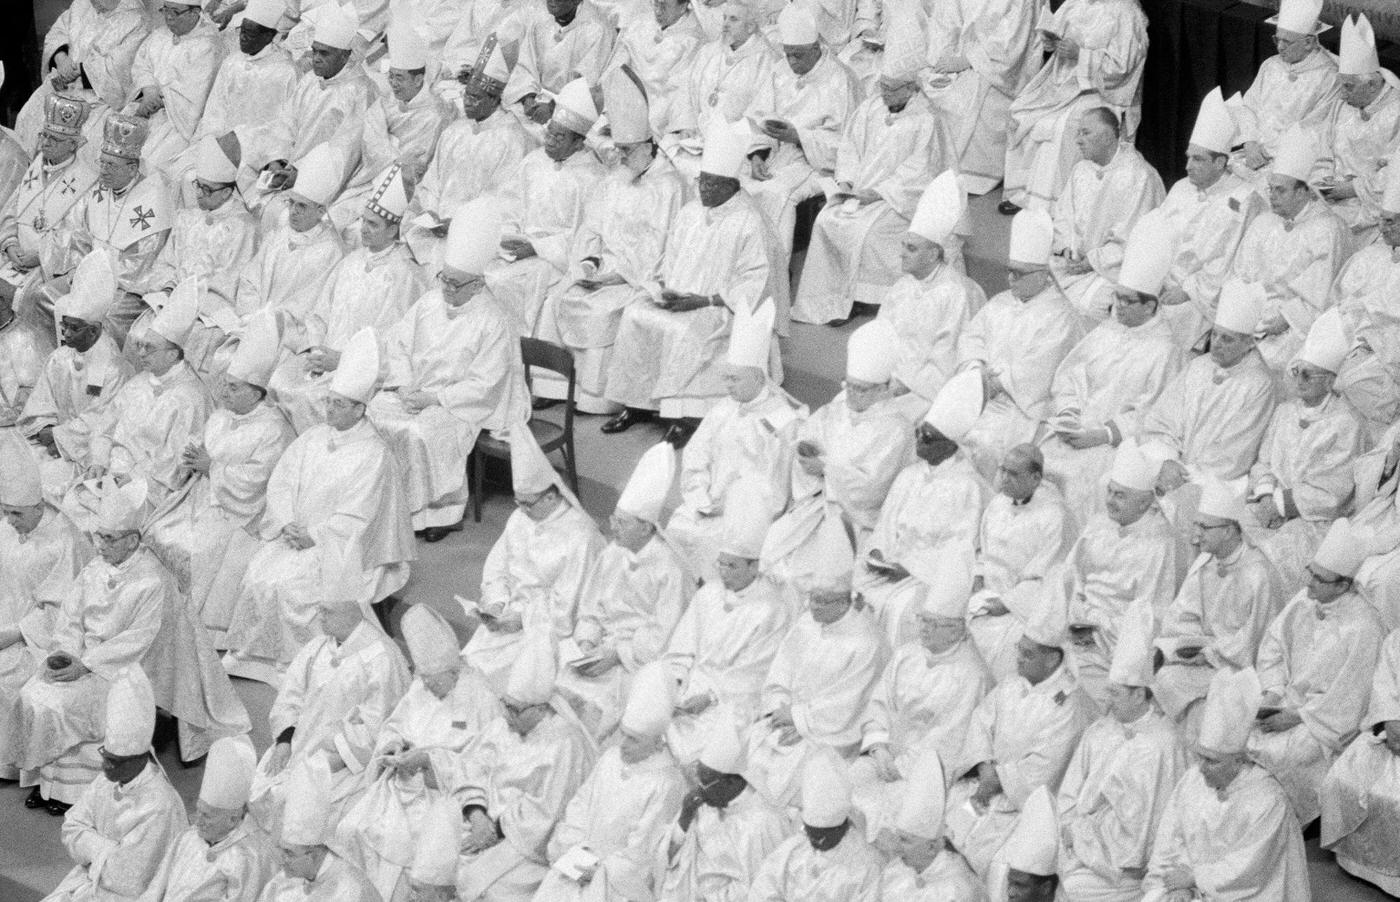 Opening of the Synod at St Peter's Basilica in Rome, 1985